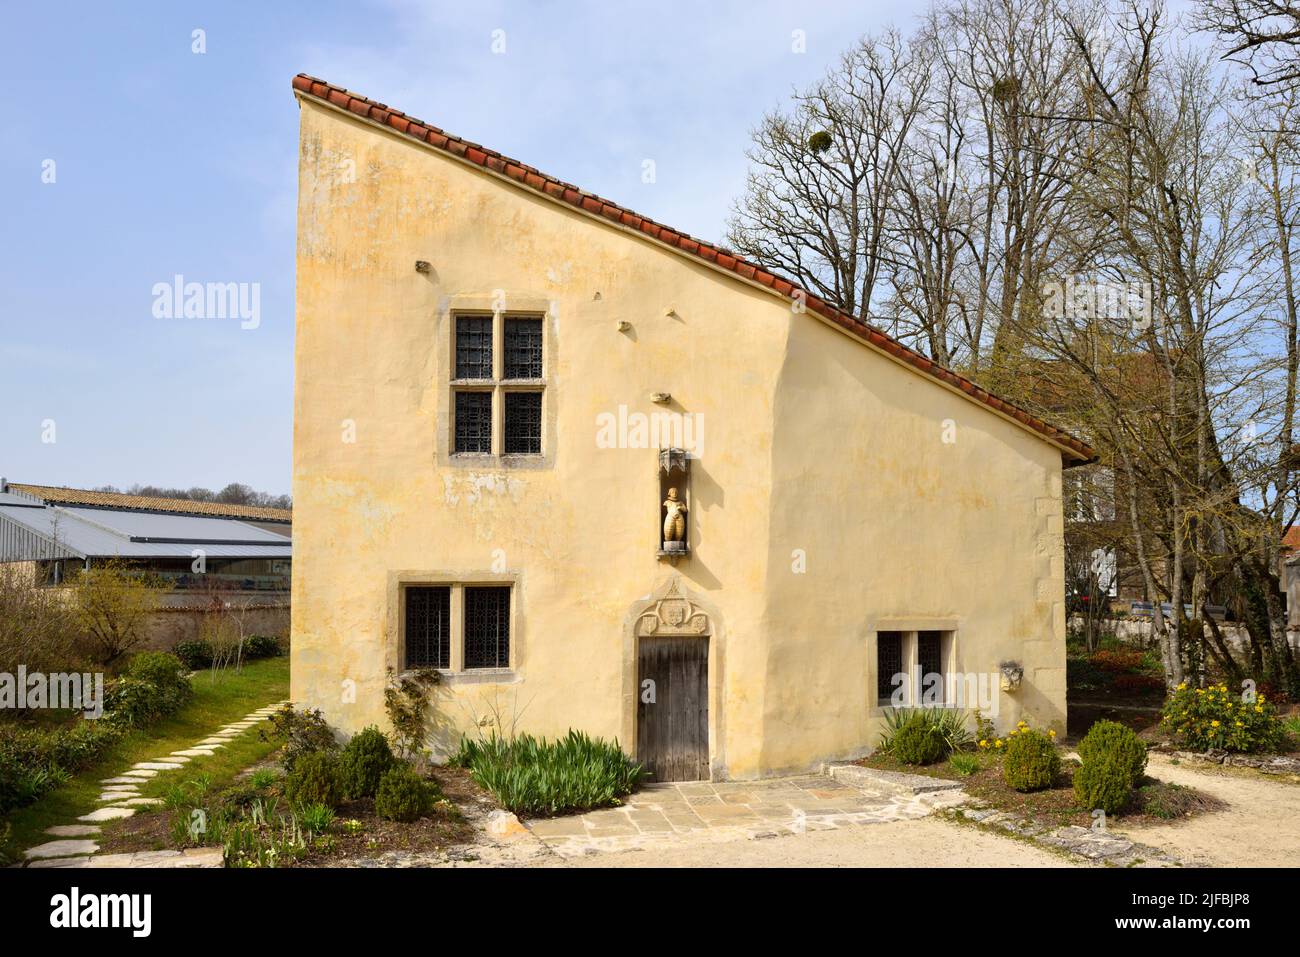 France, Vosges, Domremy la Pucelle, birthplace house of Joan of Arc, Birthplace of Joan of Arc built in the 14th century Stock Photo